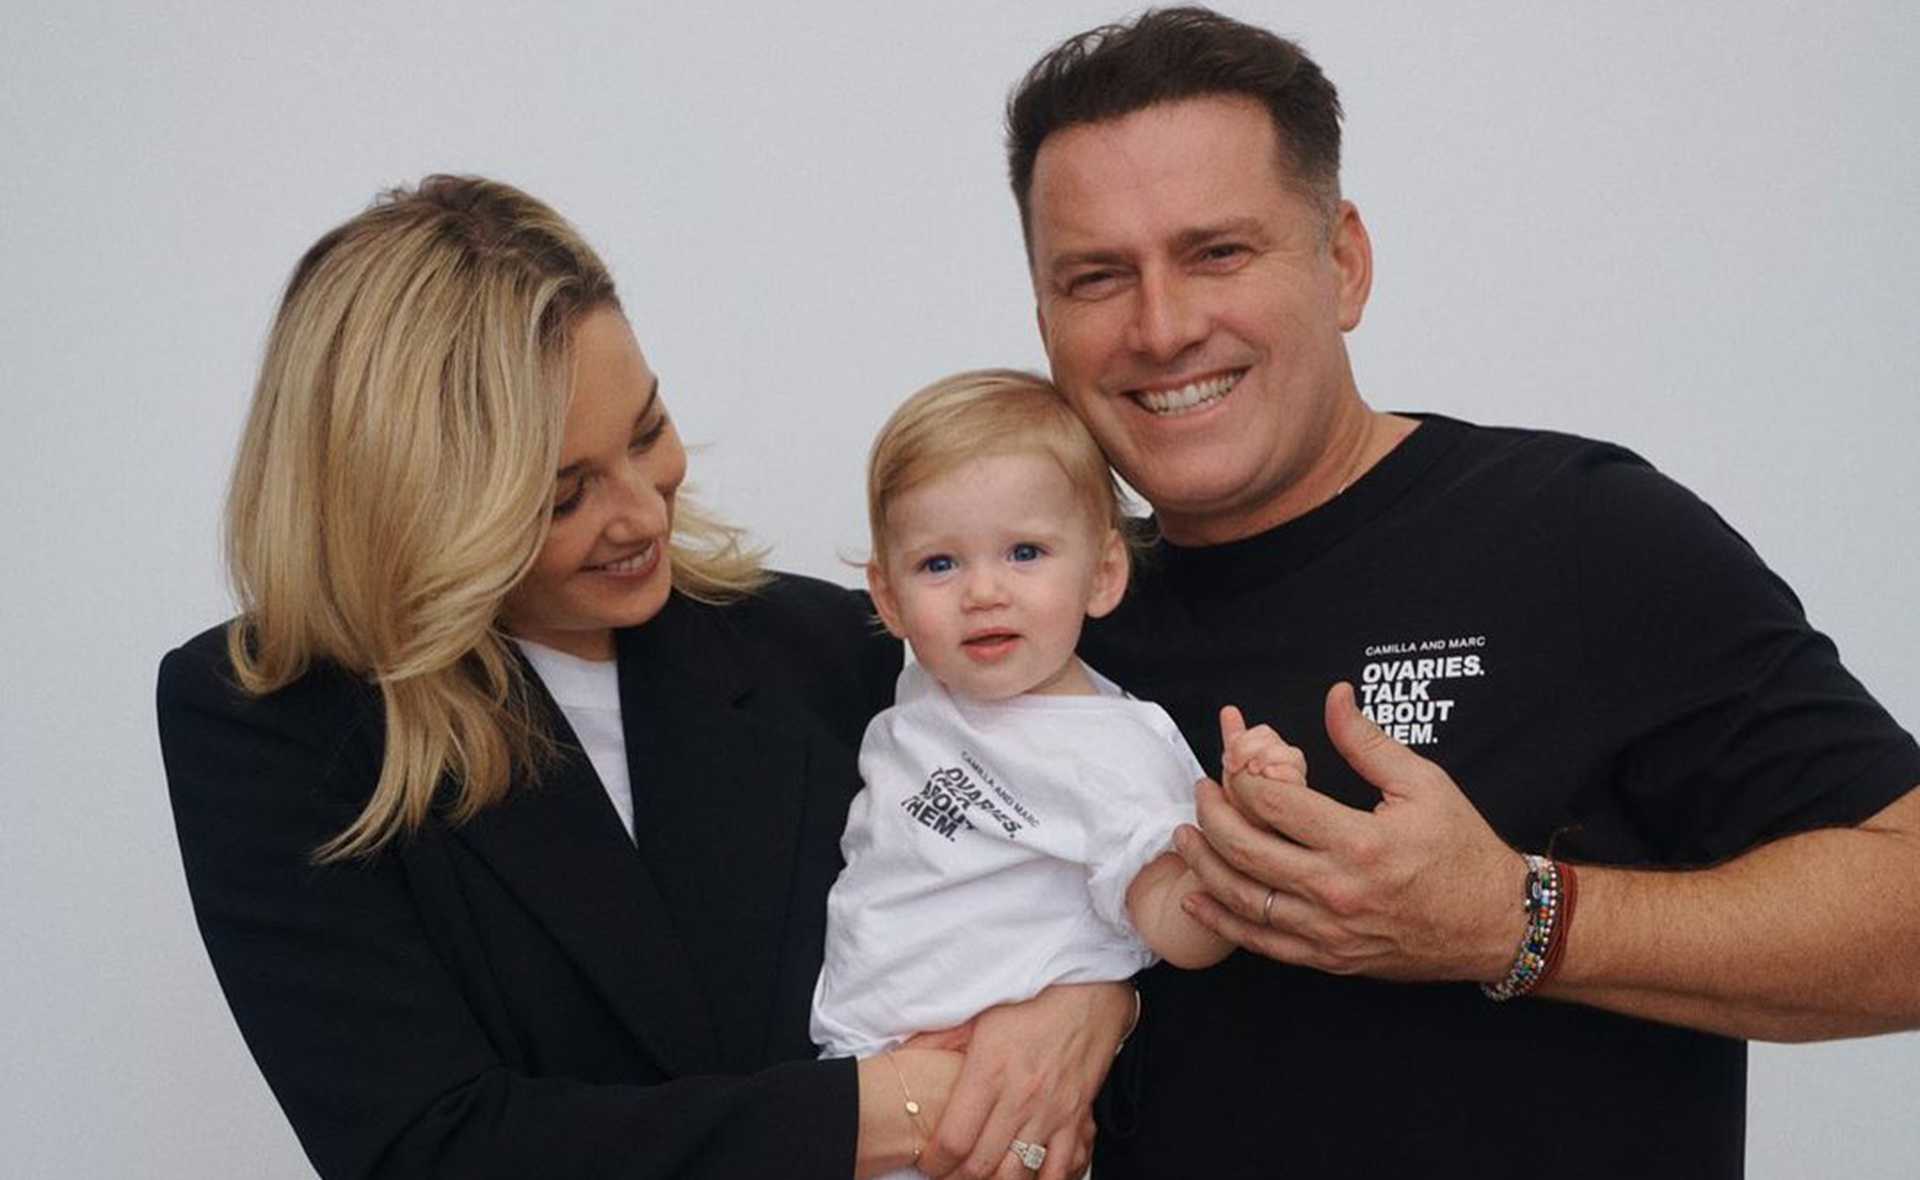 Karl Stefanovic reveals his entire family caught COVID over the holidays: “We were most worried about little Harper”